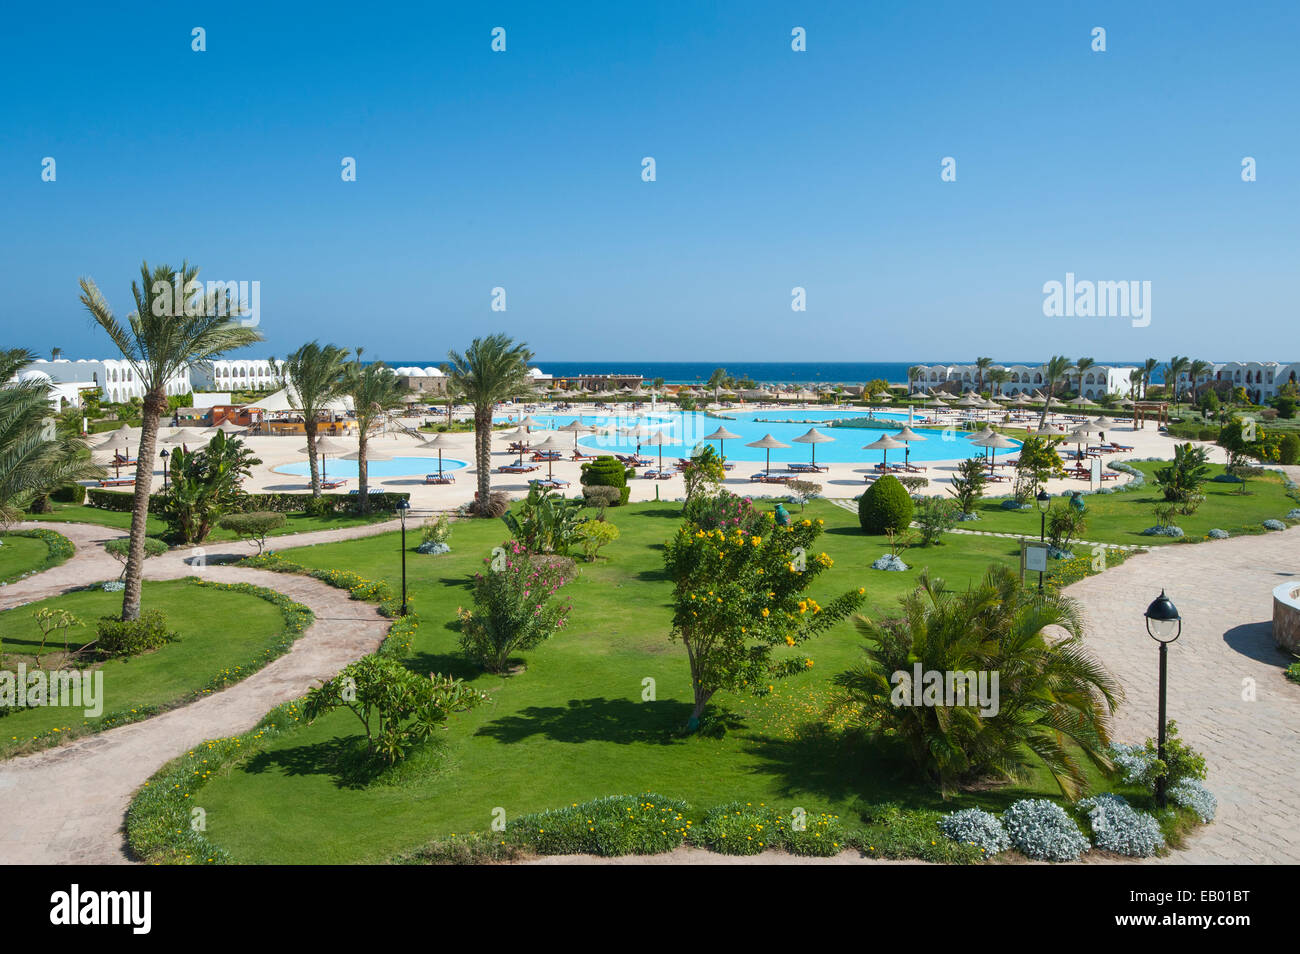 View over a large luxury tropical resort swimming pool with gardens Stock Photo